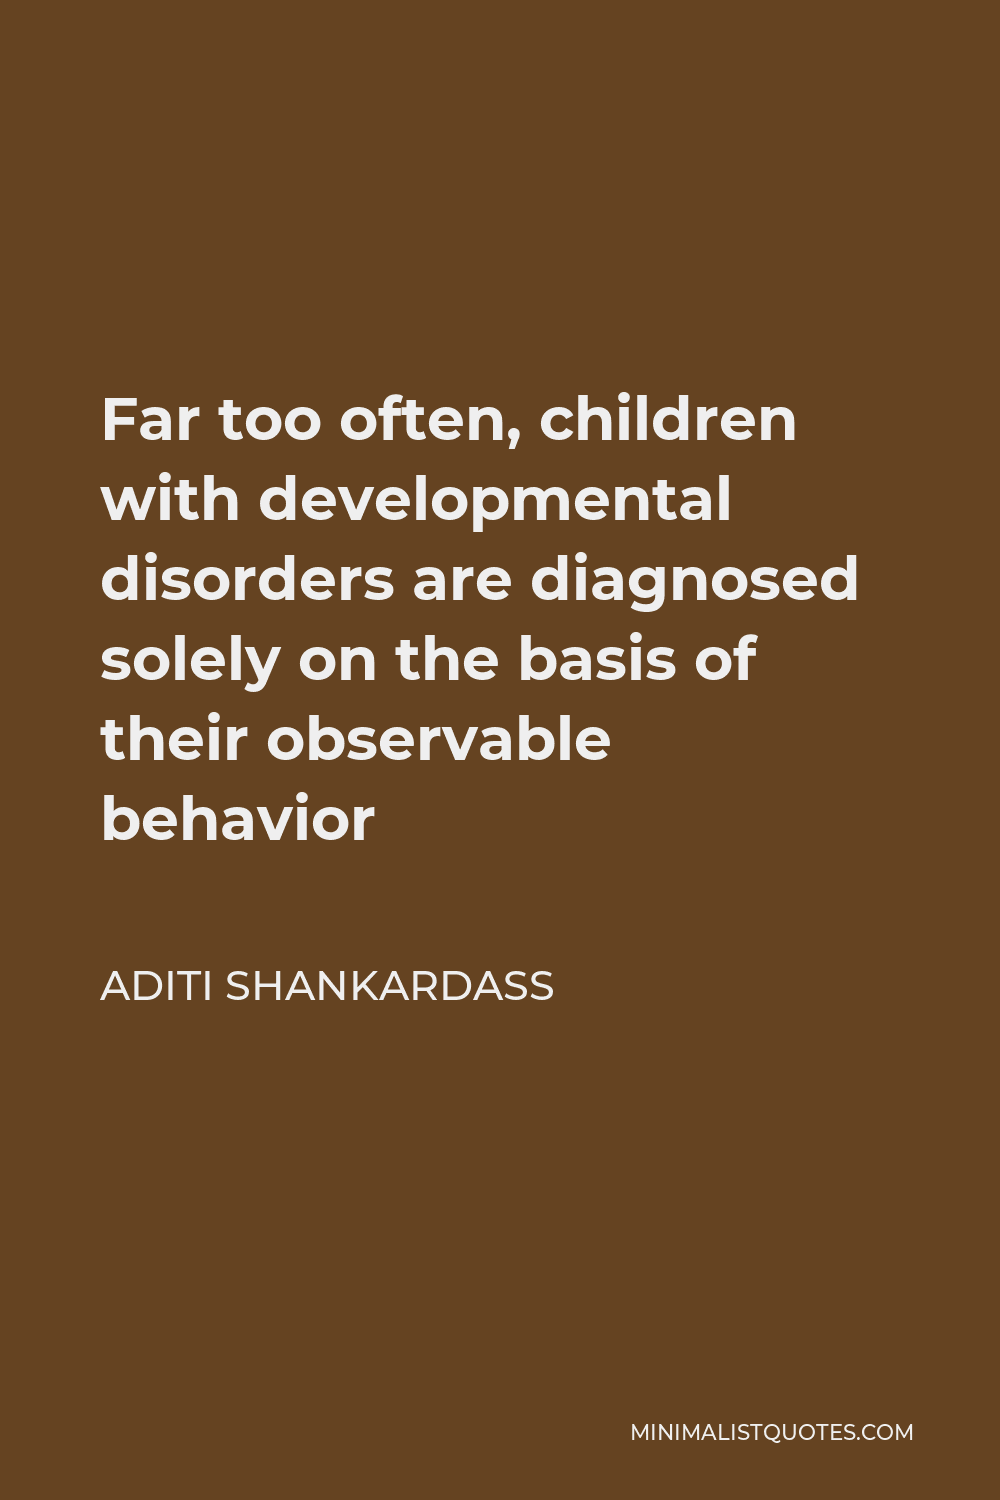 Aditi Shankardass Quote - Far too often, children with developmental disorders are diagnosed solely on the basis of their observable behavior